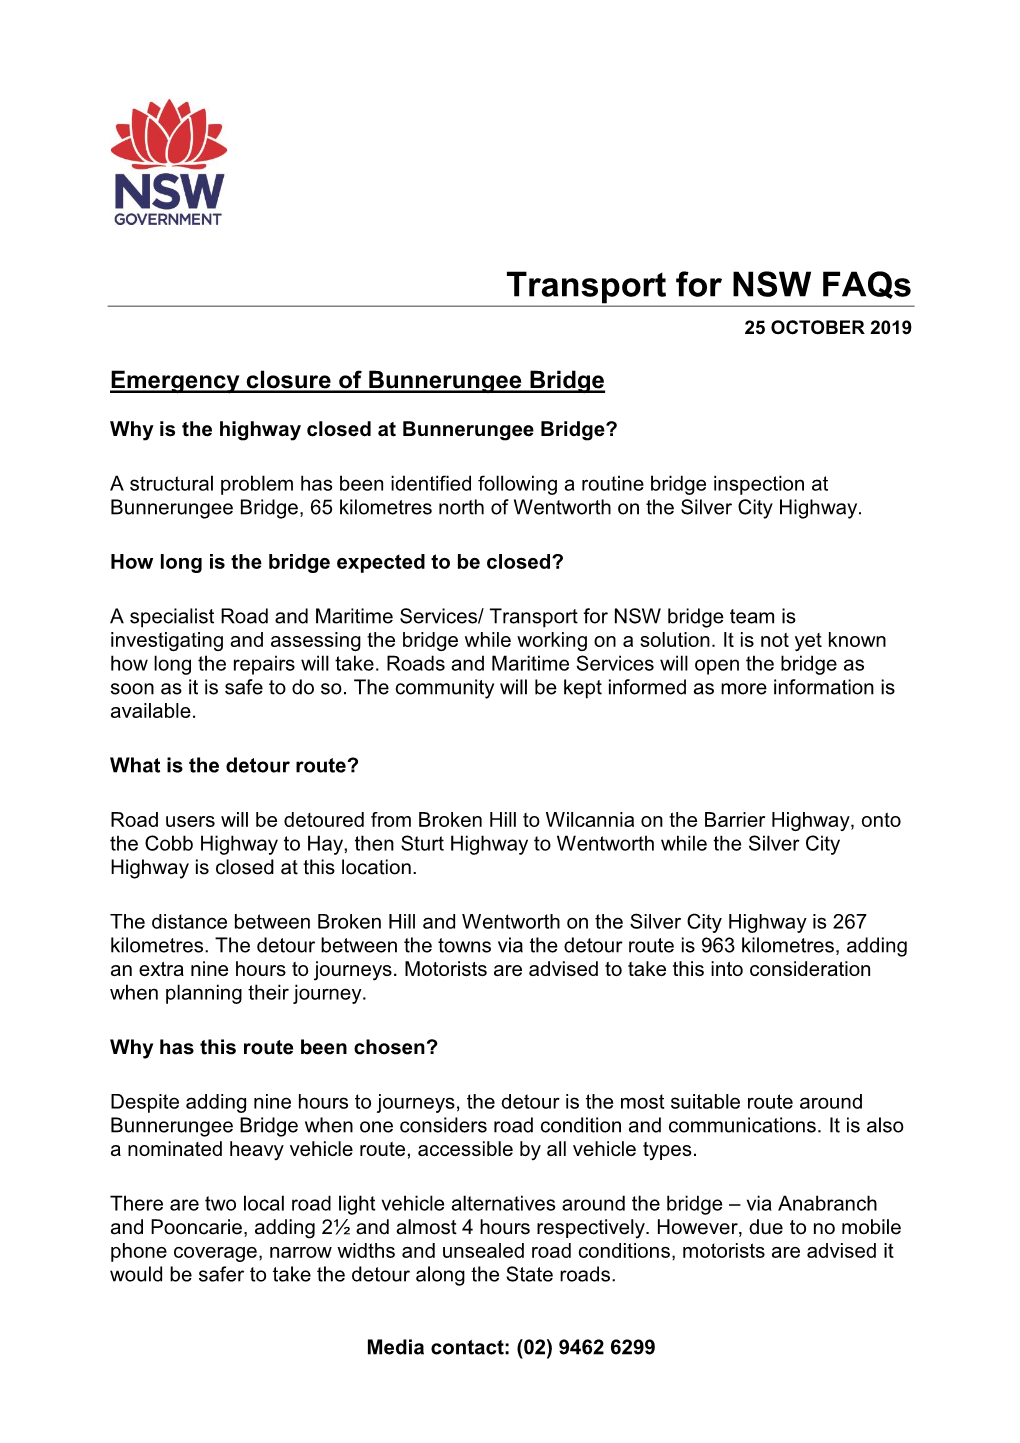 Transport for NSW Faqs 25 OCTOBER 2019